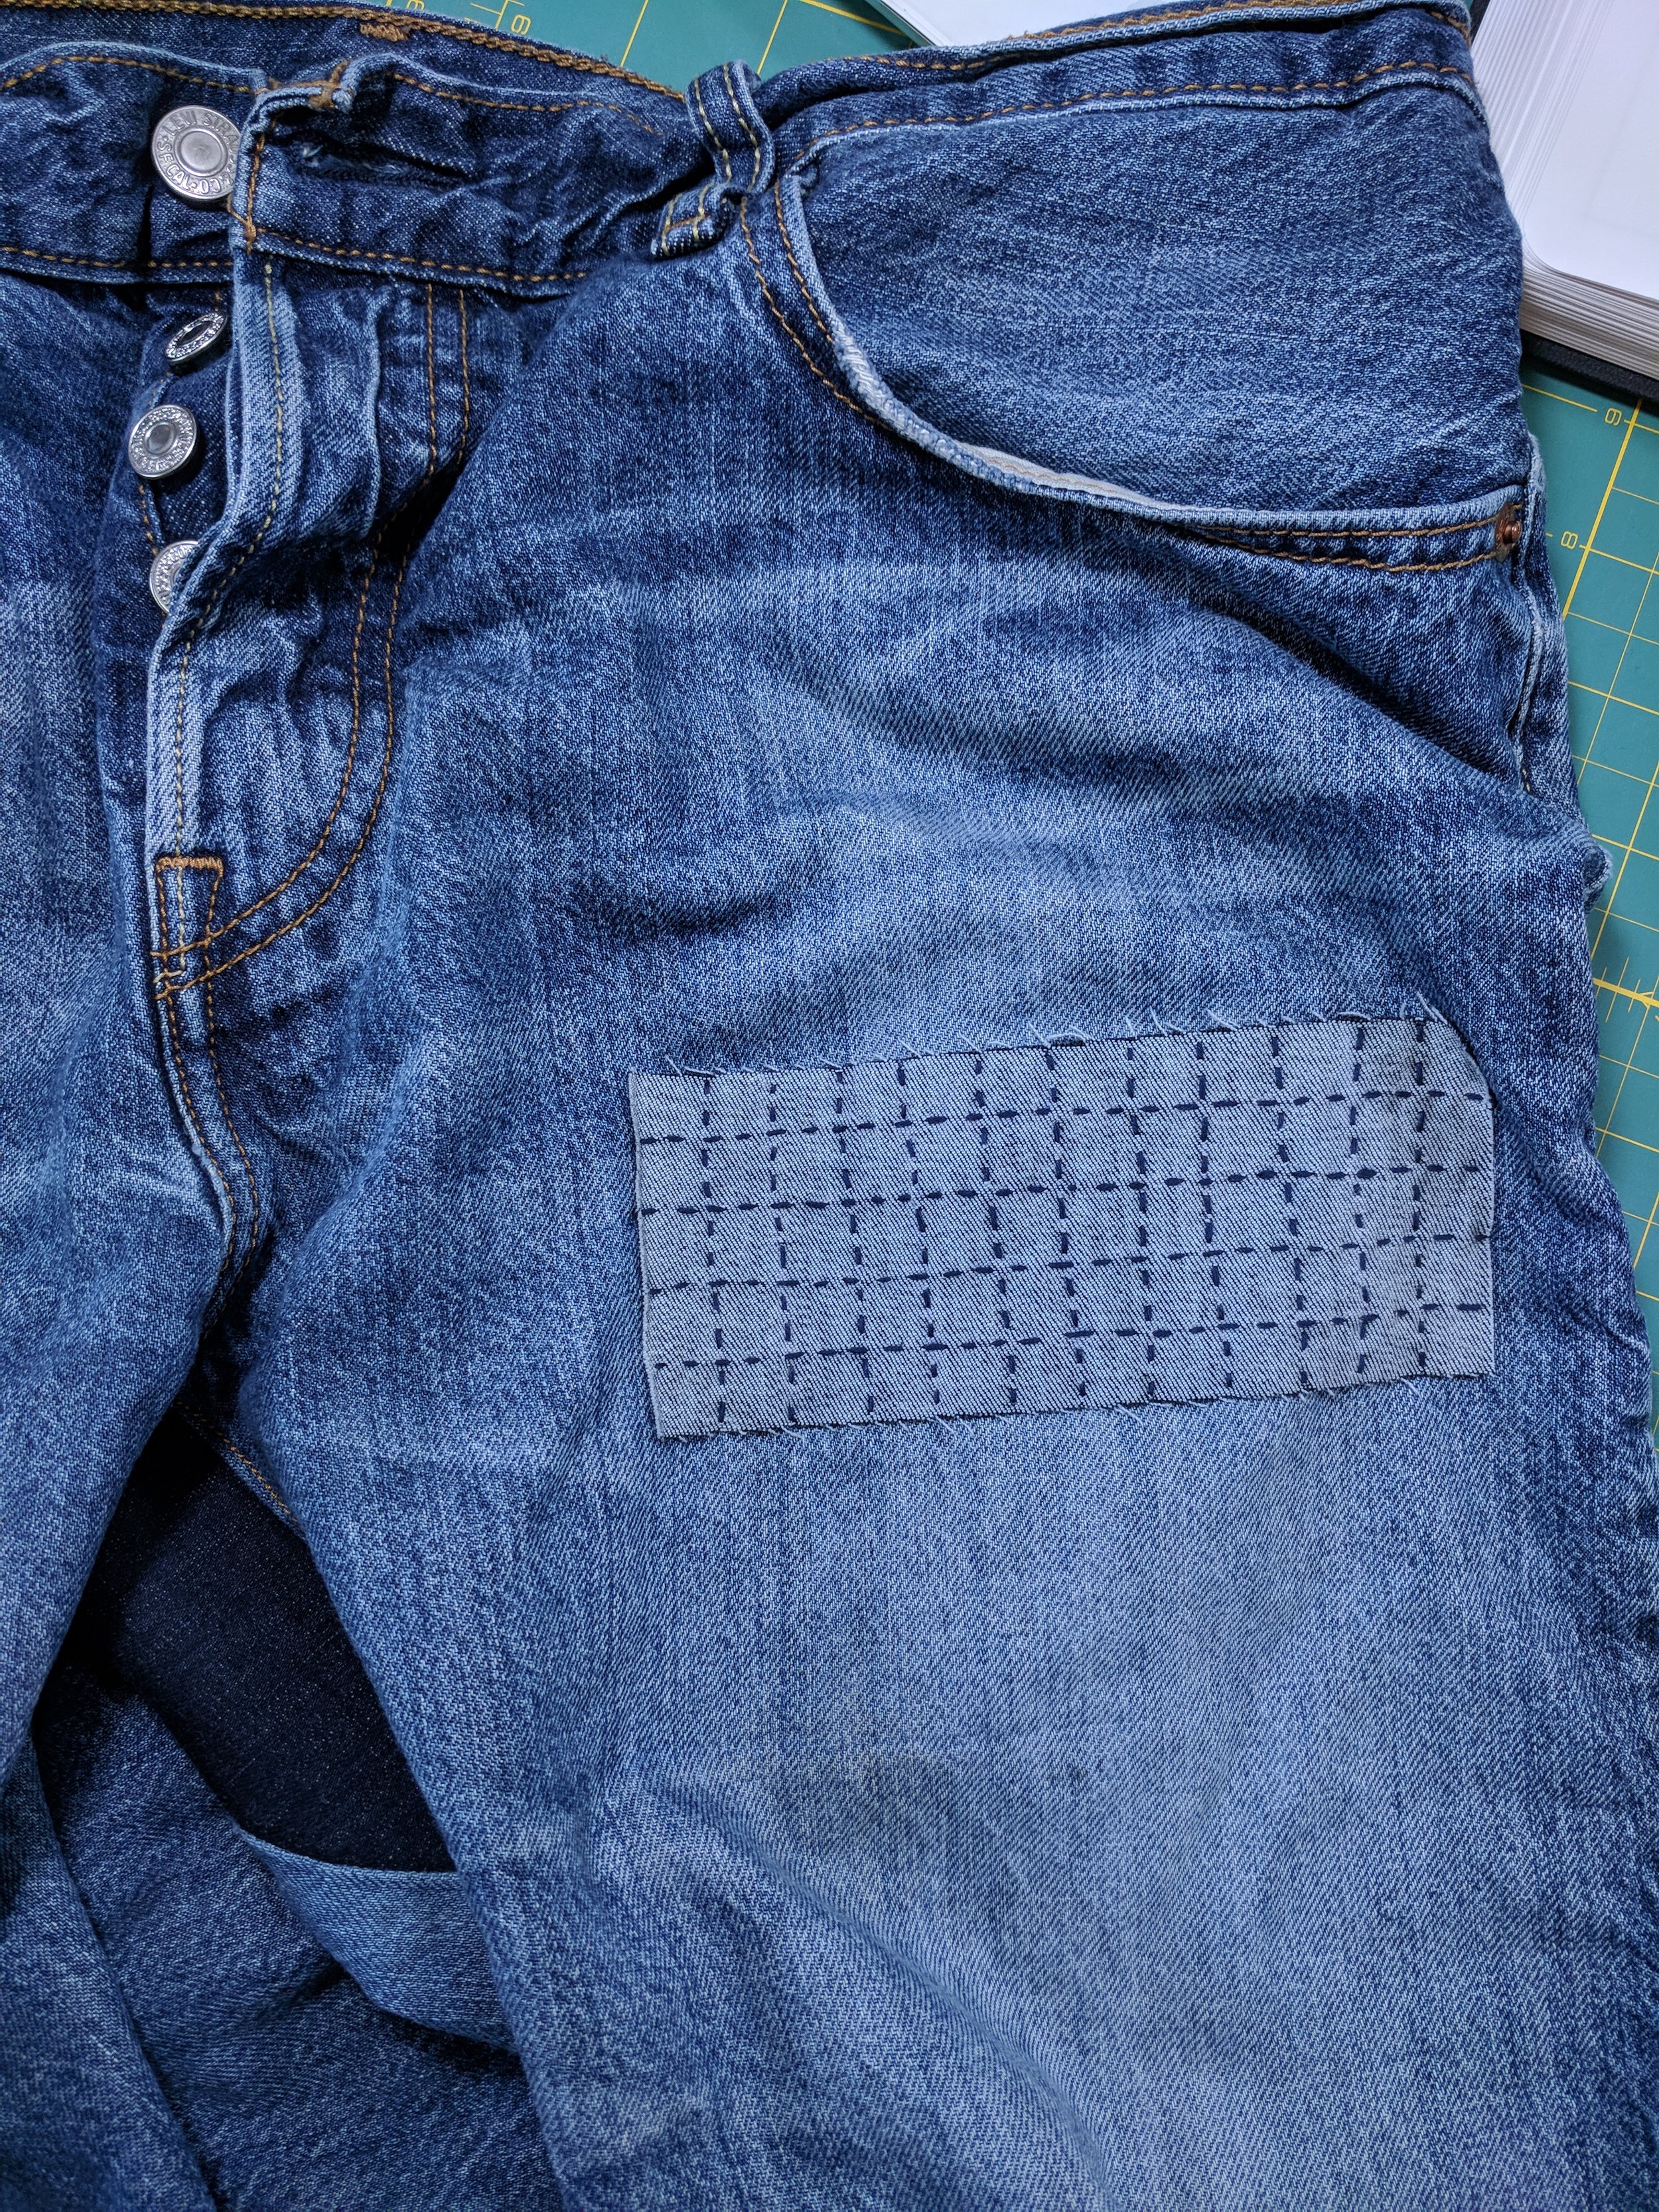 Repairing Jeans with Oversize Knee Patches and Sashiko Stitching